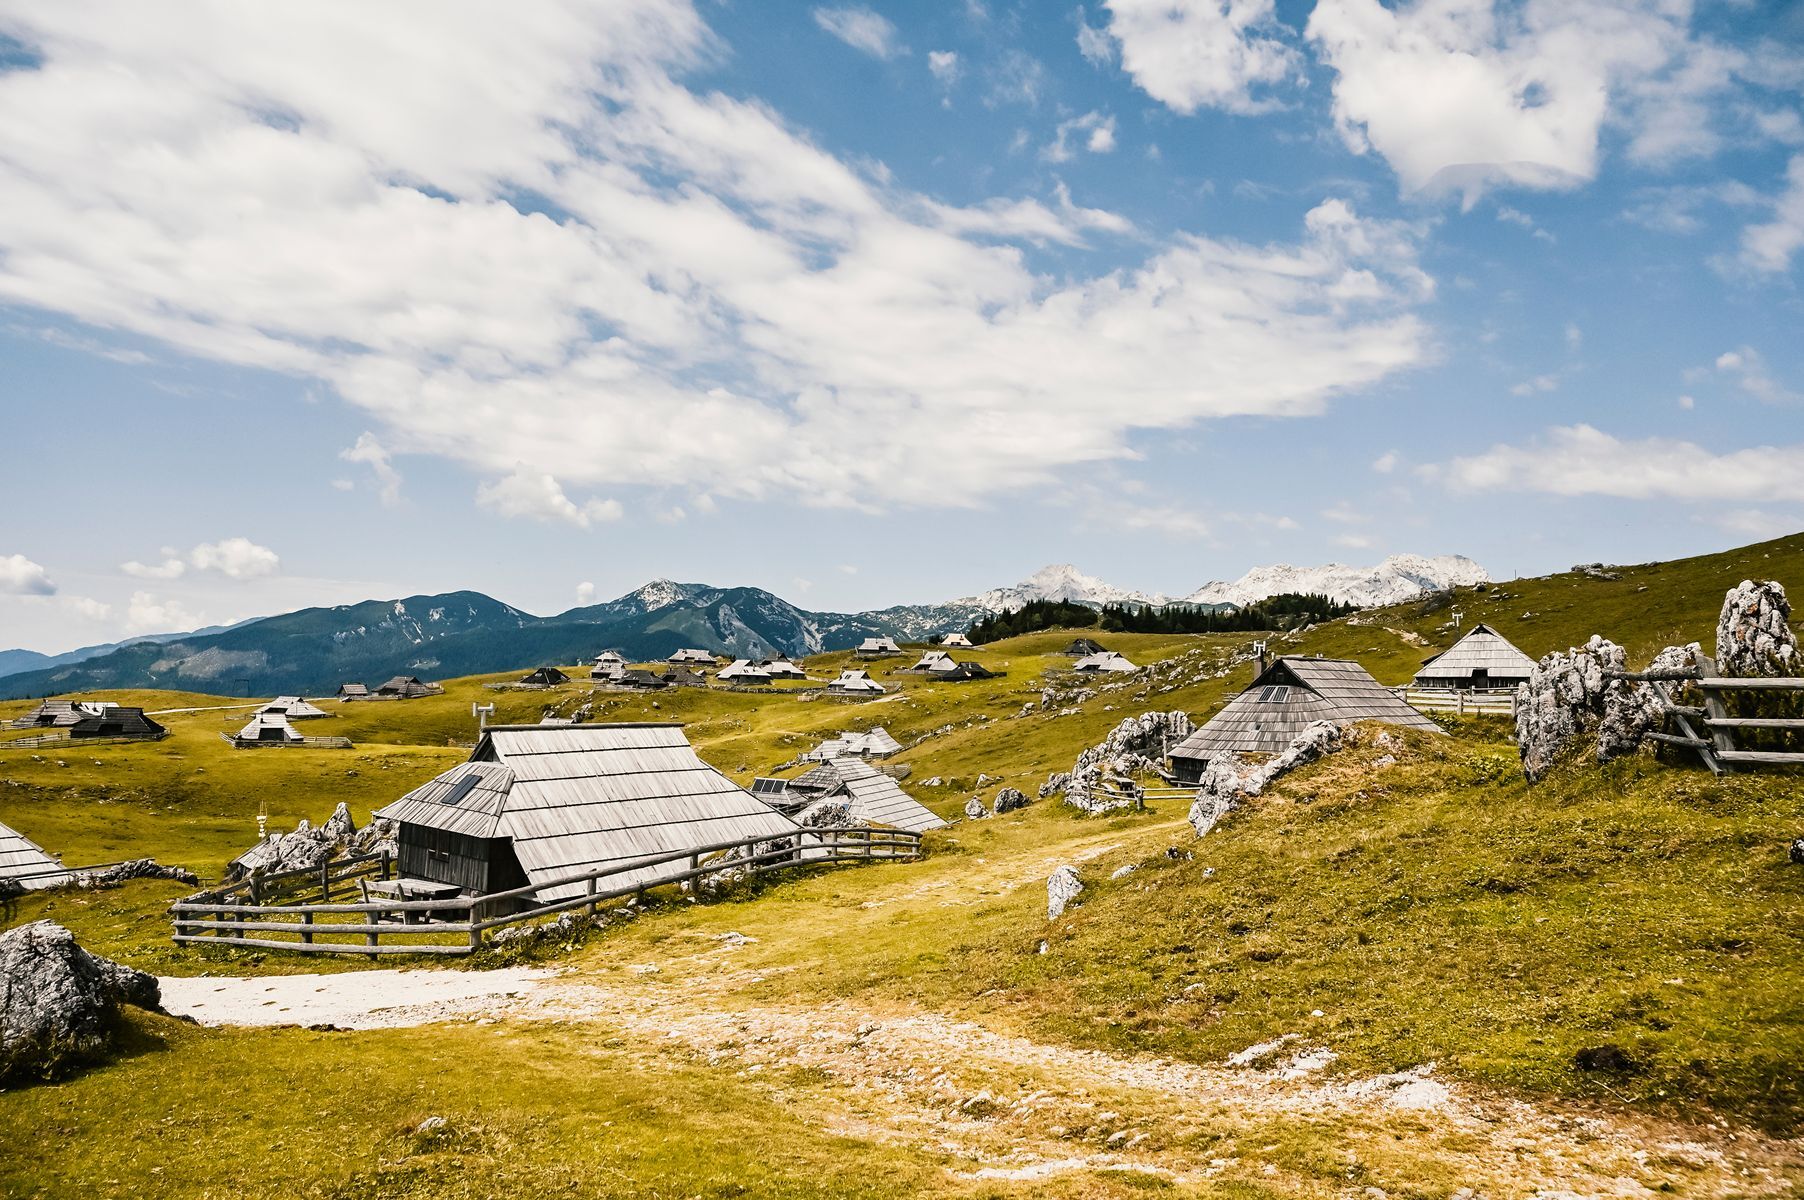 <p>Located in the <a href="https://www.slovenia.info/en/places-to-go/kamnik-savinja-alps">Kamnic Alps</a>, <a href="https://www.slovenia.info/en/places-to-go/attractions/velika-planina">Velika Planina</a> is Europe’s largest herdsmen’s village, and offers a glimpse into authentic Slovenian shepherd life. In summer, you can take a cable car up to the plateau. Once at the top, you’ll find lush green pastures dotted with traditional wood cottages, plus astonishing views of the surrounding peaks. It’s the ideal place for taking a peaceful hike through alpine meadows or sampling local specialties such as mountain cheese.</p>